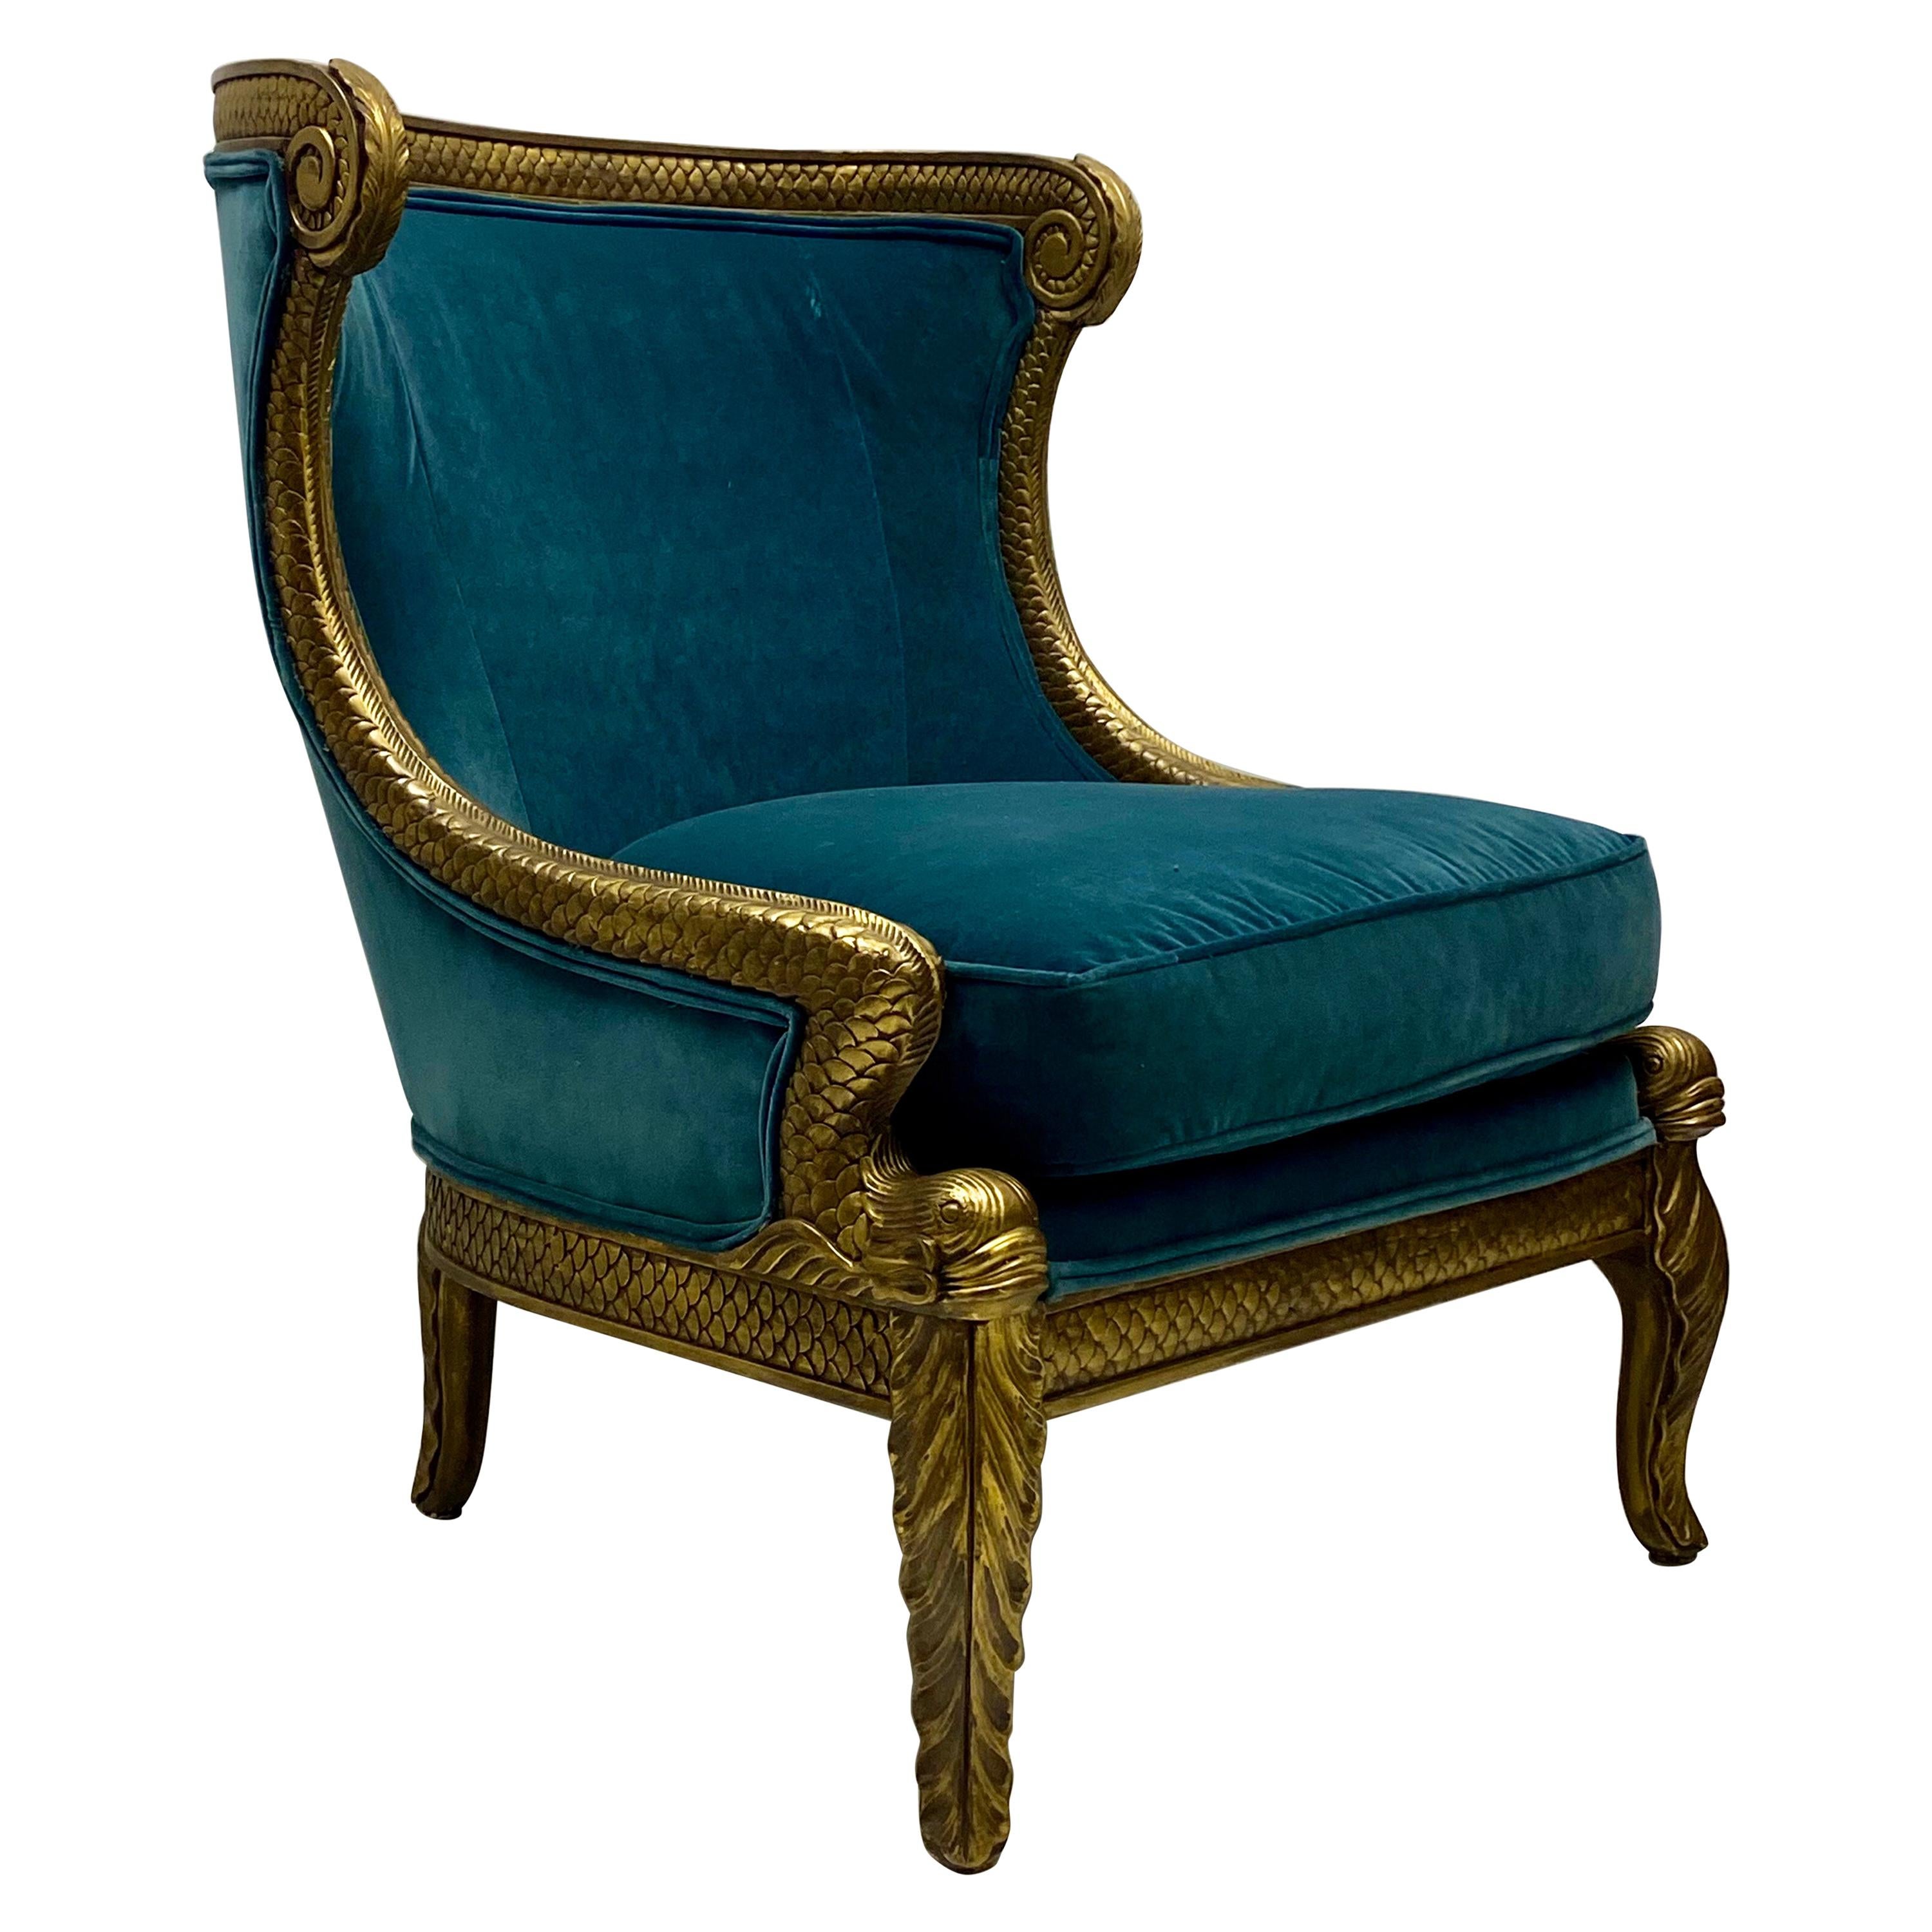 1970s Large Scale Neoclassical Style Erwin-Lambeth Dolphin Chair